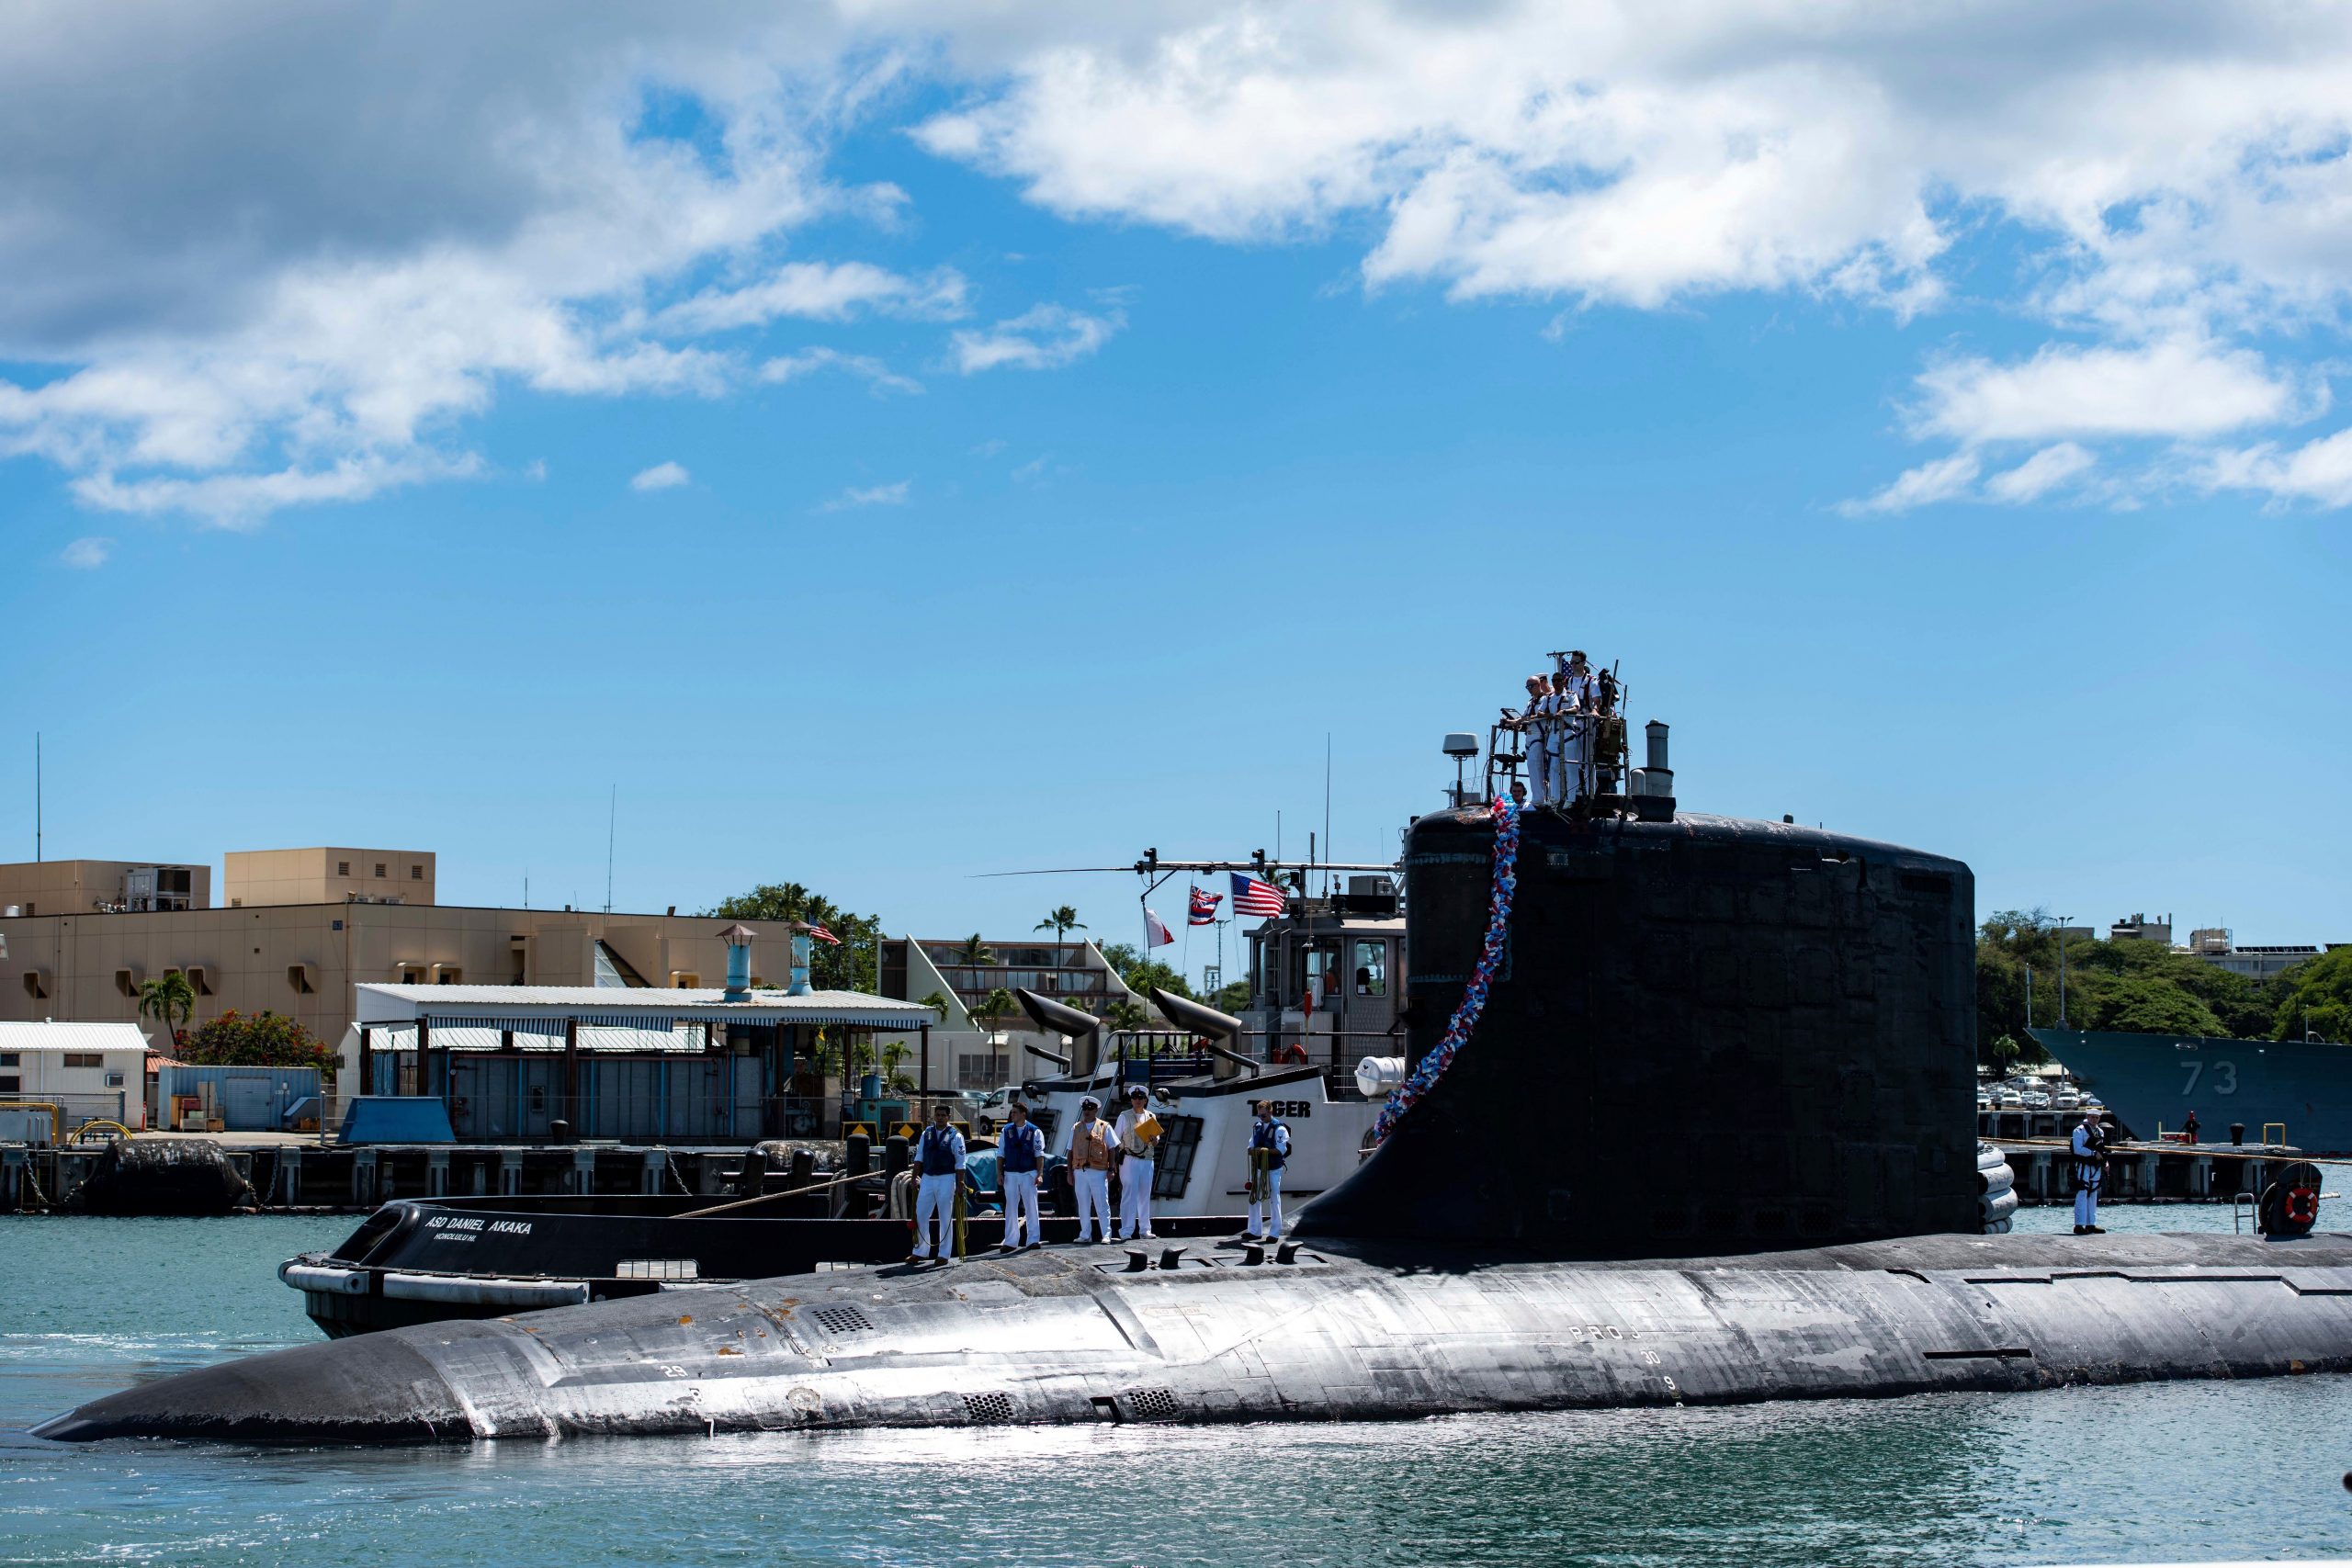 France calls off gala in US following AUKUS’ nuclear submarine deal